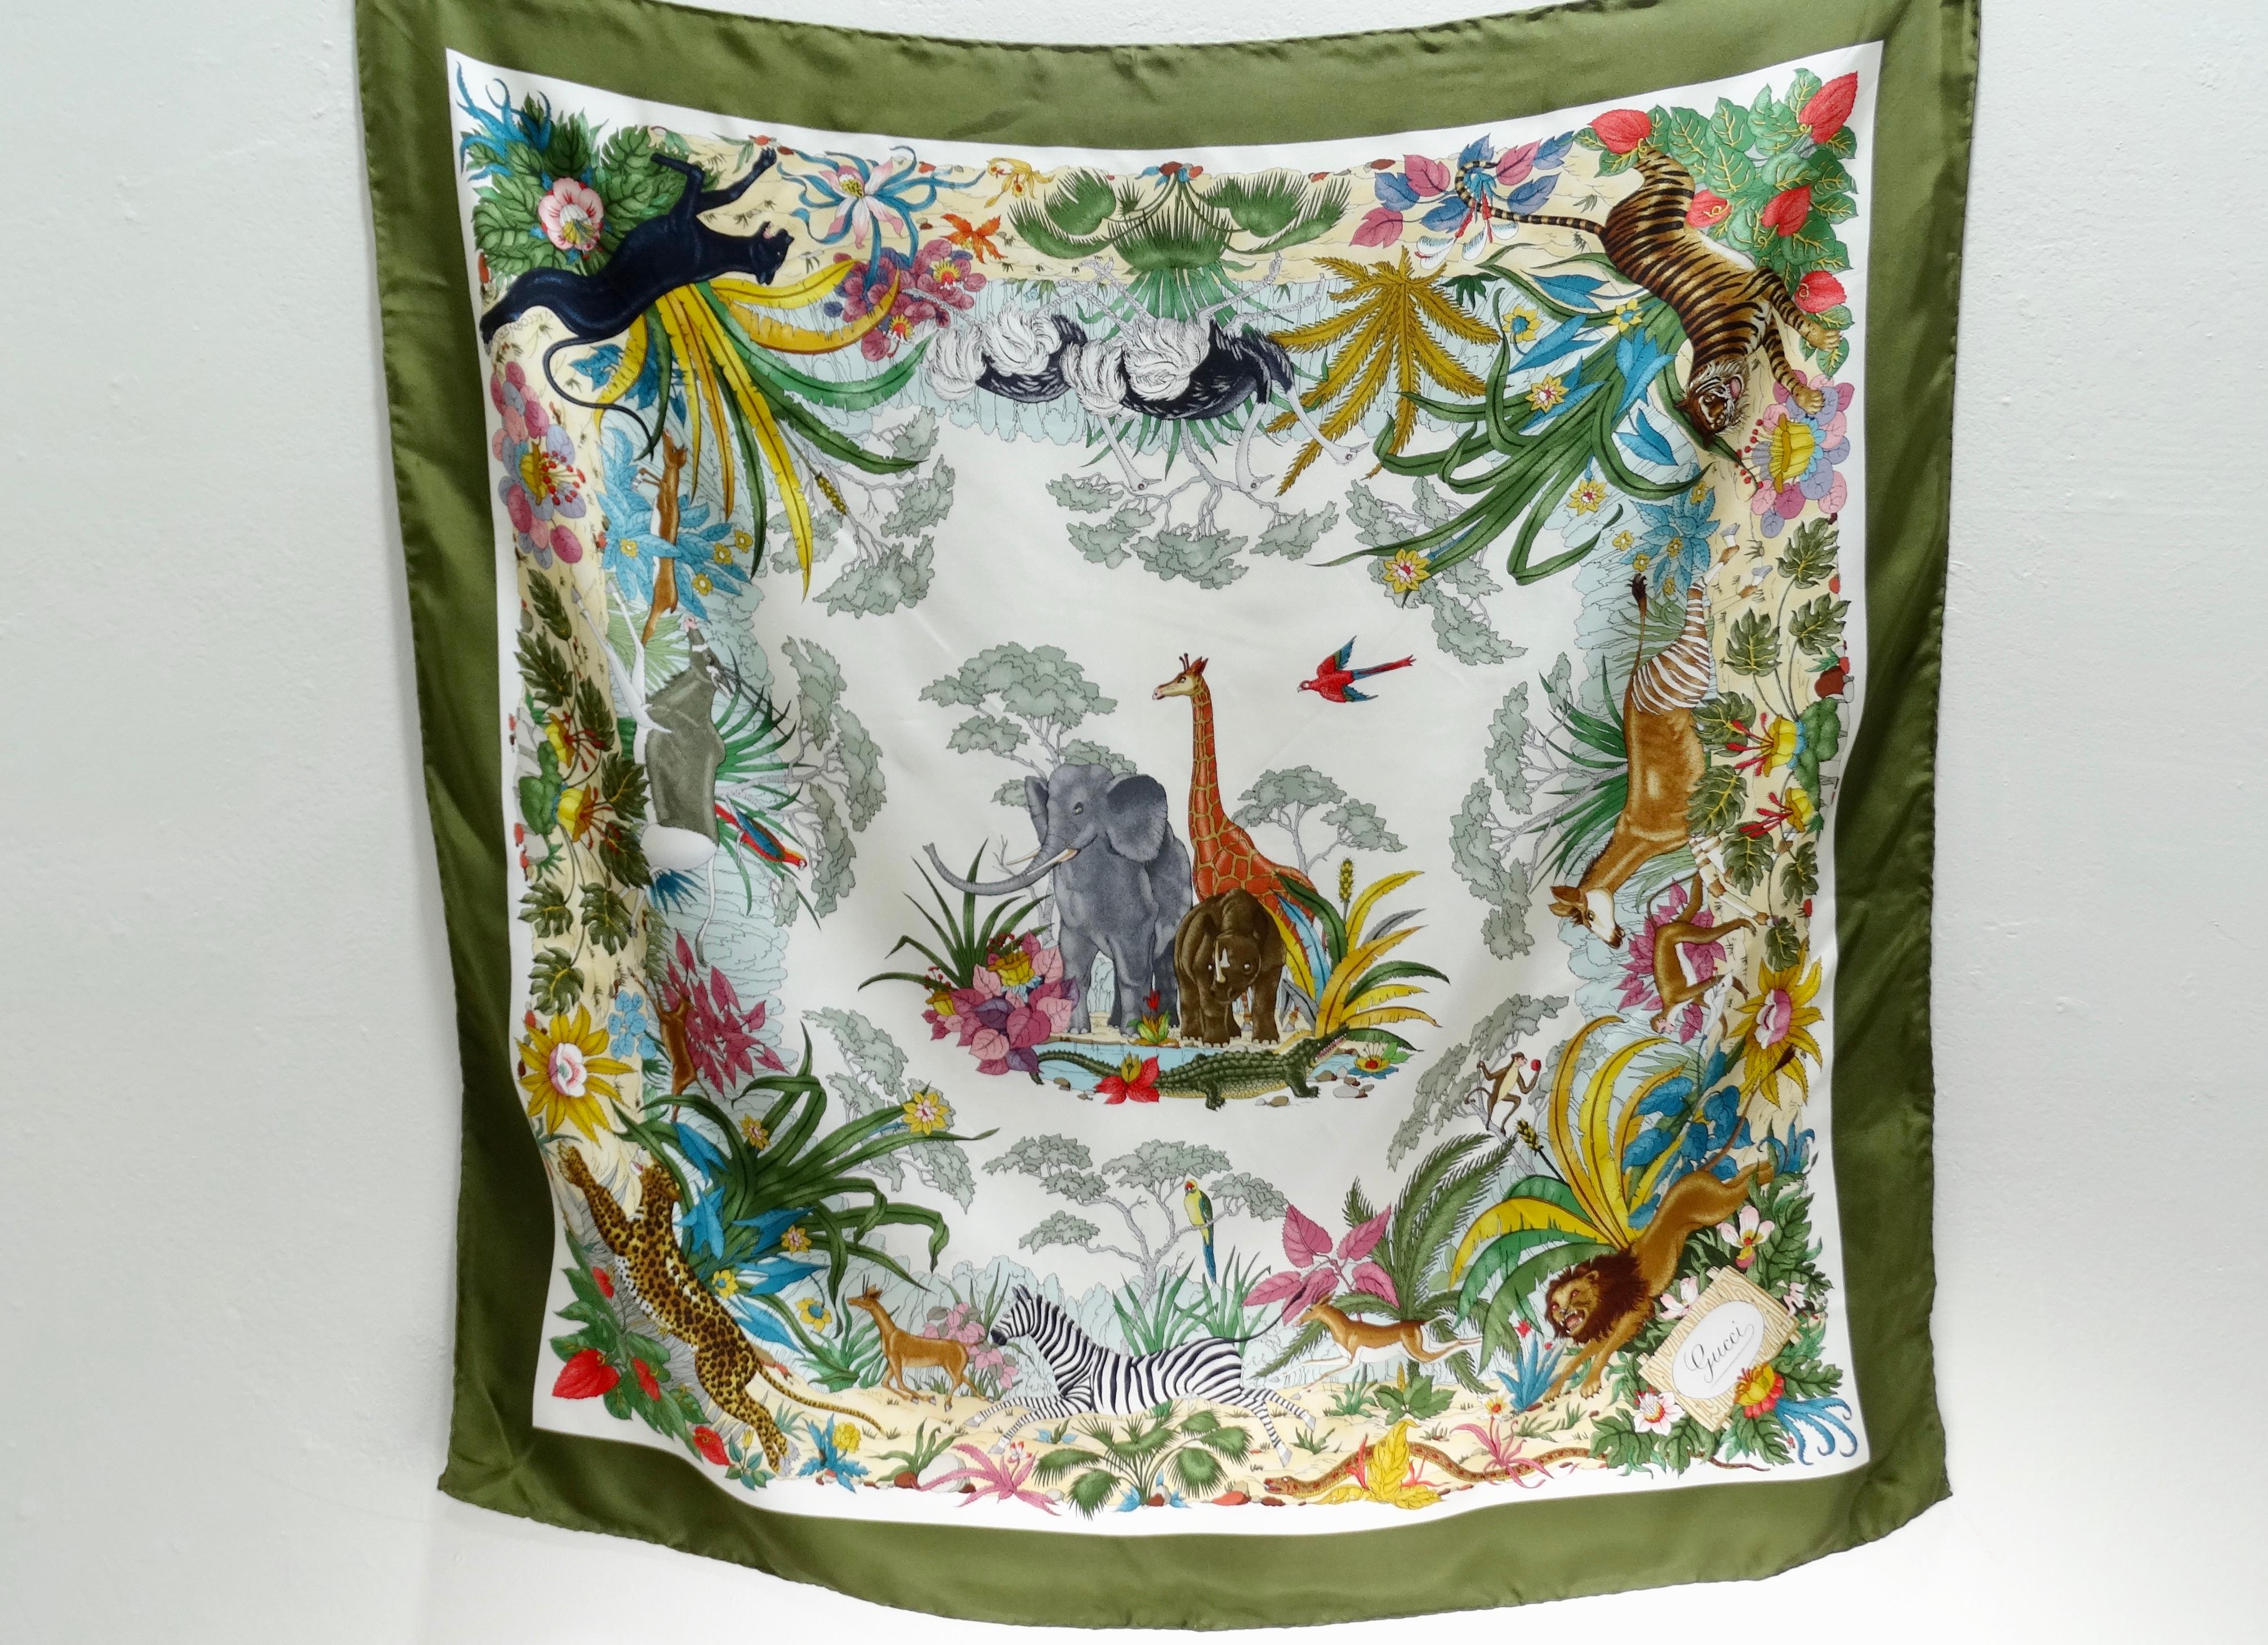 Everyone need a Gucci scarf in their wardrobe! Circa 1970s, this gorgeous and rare Gucci silk scarf features a jungle motif designed by Vittorio Accornero. Motif includes a variety of jungle animals such as Giraffes, birds, zebras and tropical